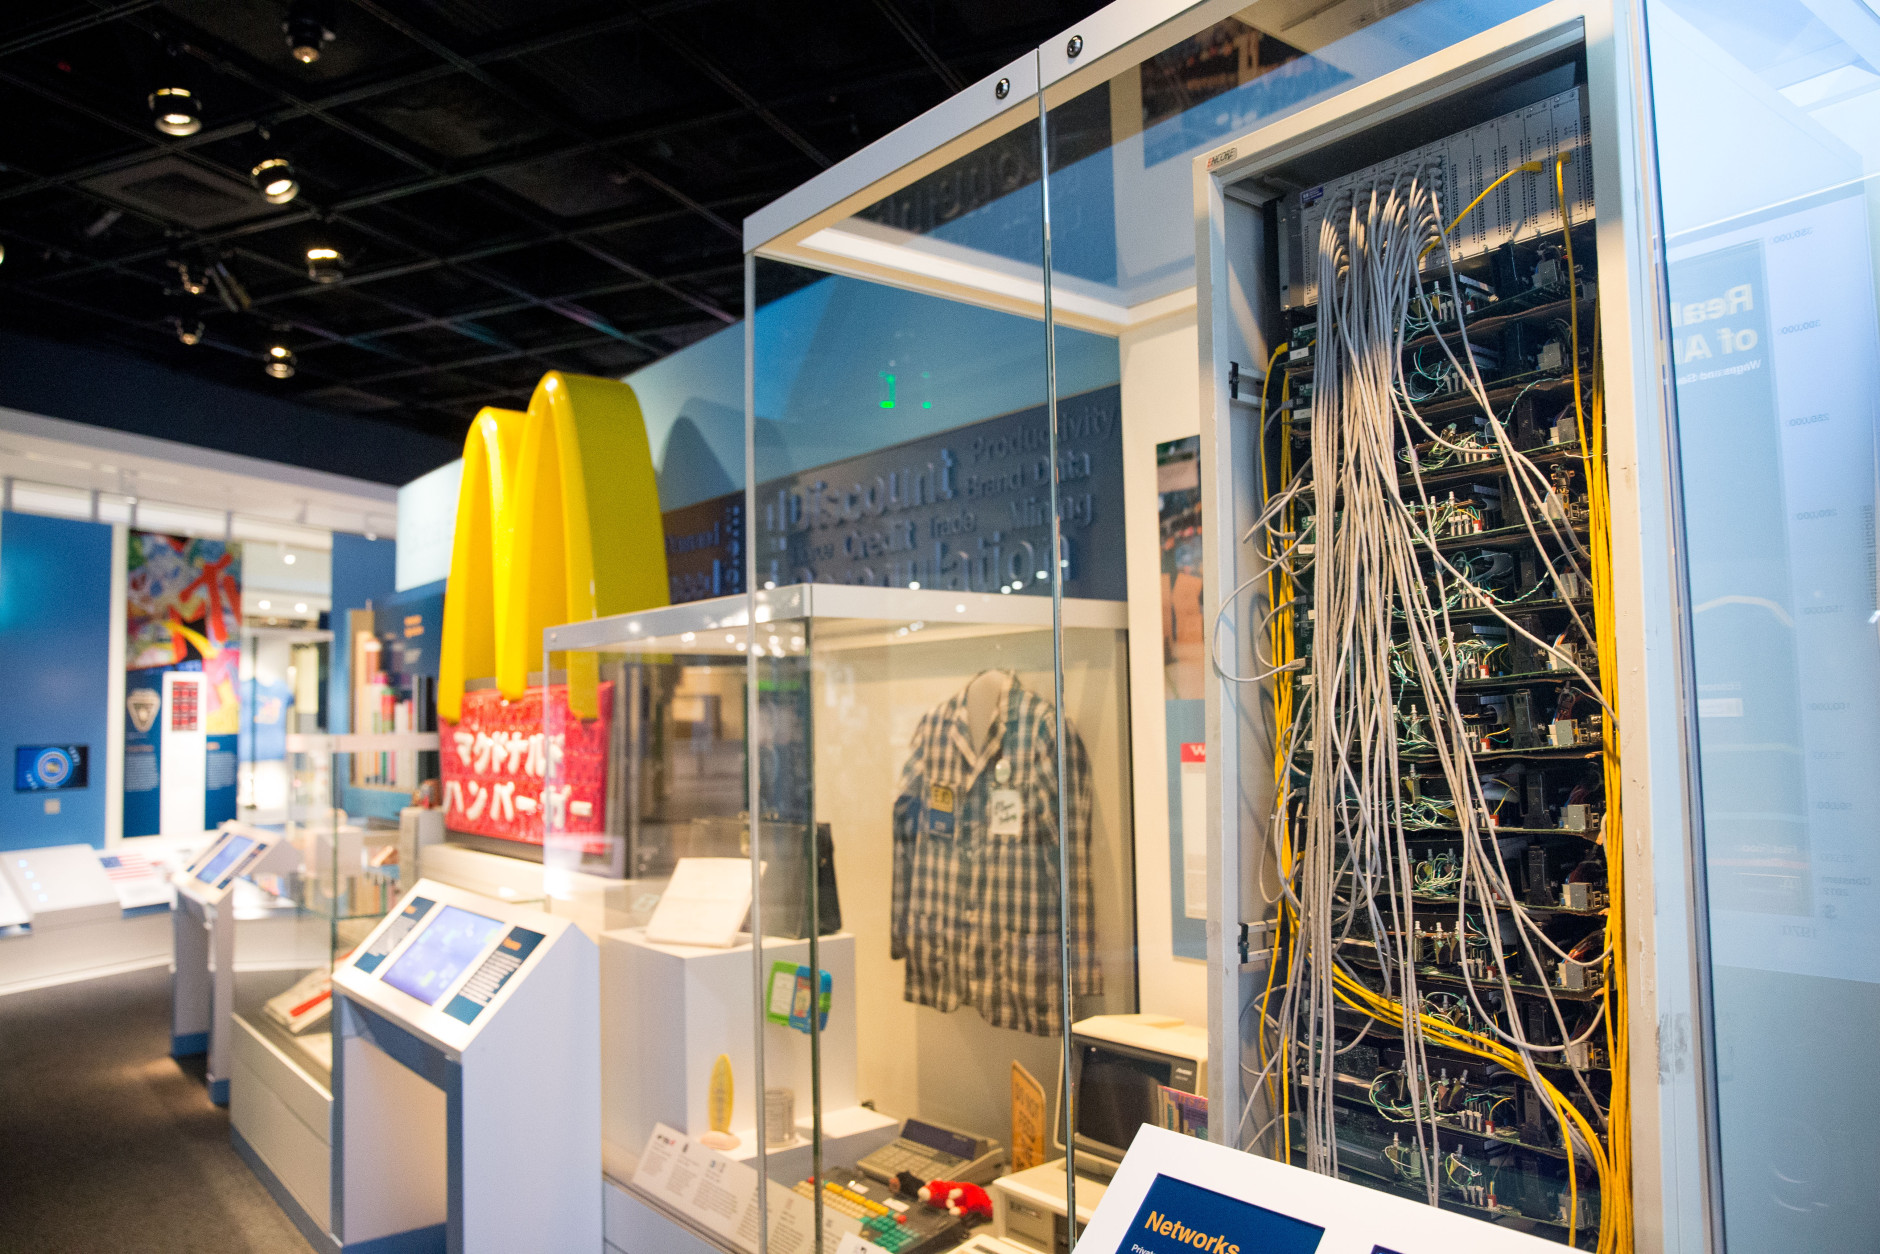 In this photo taken June 16, 2015, a cork board server, right, made by Google founders Larry Page and Sergey Brin in 1999, is displayed at the American Enterprise exhibit at the Smithsonian's National Museum of American History in Washington. A wide range of innovations from Eli Whitneys cotton gin to the early Google servers will help tell the story of American business history for the first time at the Smithsonian. The Smithsonians National Museum of American History will open its new innovation wing on July 1. It will galleries featuring U.S. inventions, money and hands-on activities. A major exhibition about American Enterprise will trace the interaction of capitalism and democracy since the mid-1700s.  (AP Photo/Andrew Harnik)